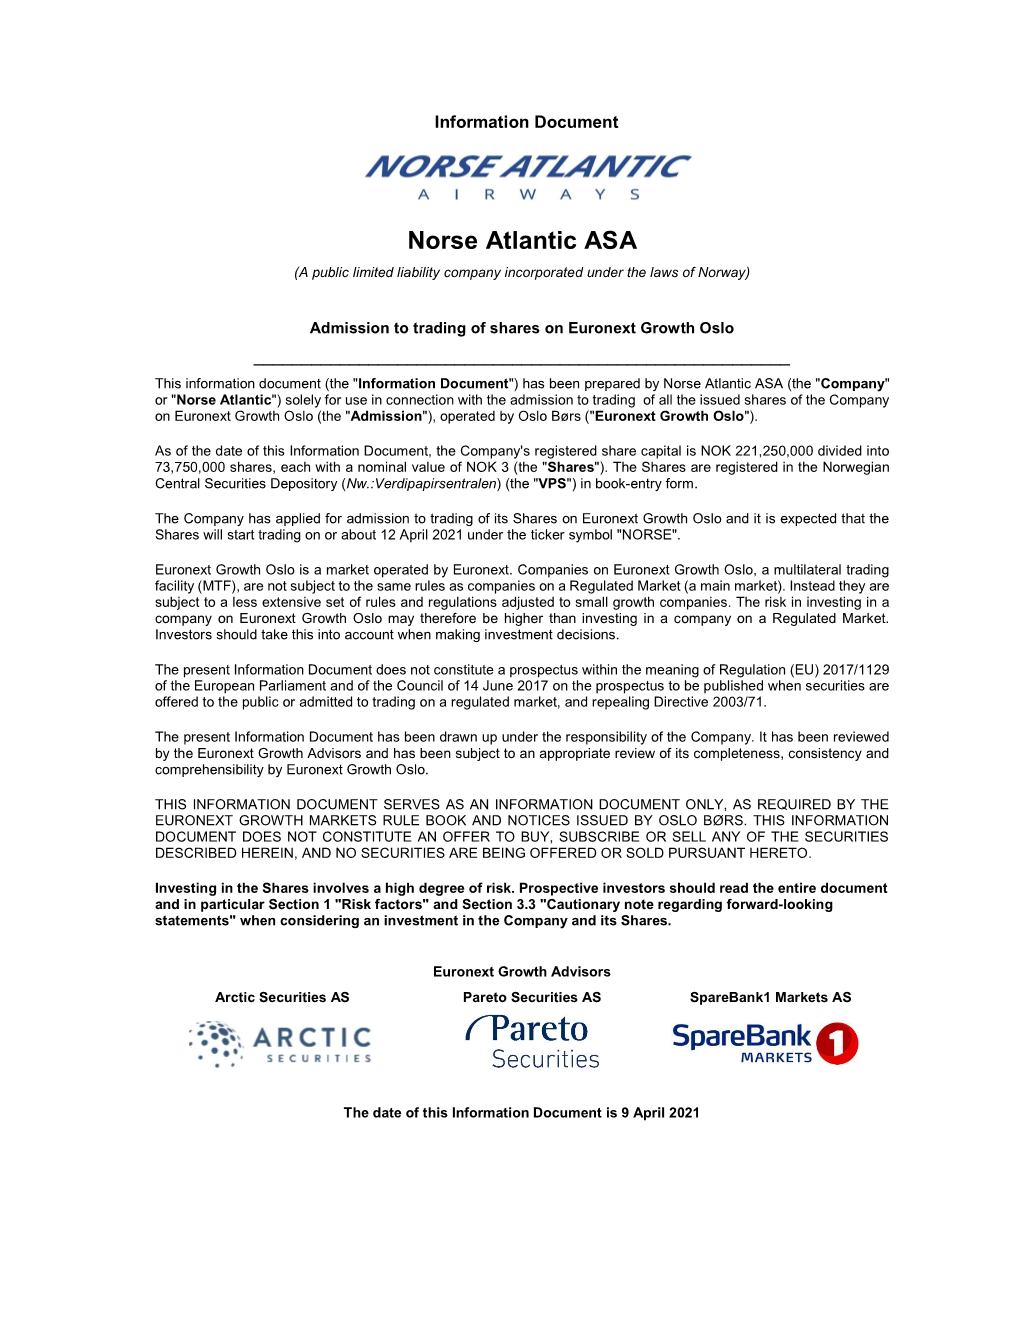 Norse Atlantic ASA (A Public Limited Liability Company Incorporated Under the Laws of Norway)